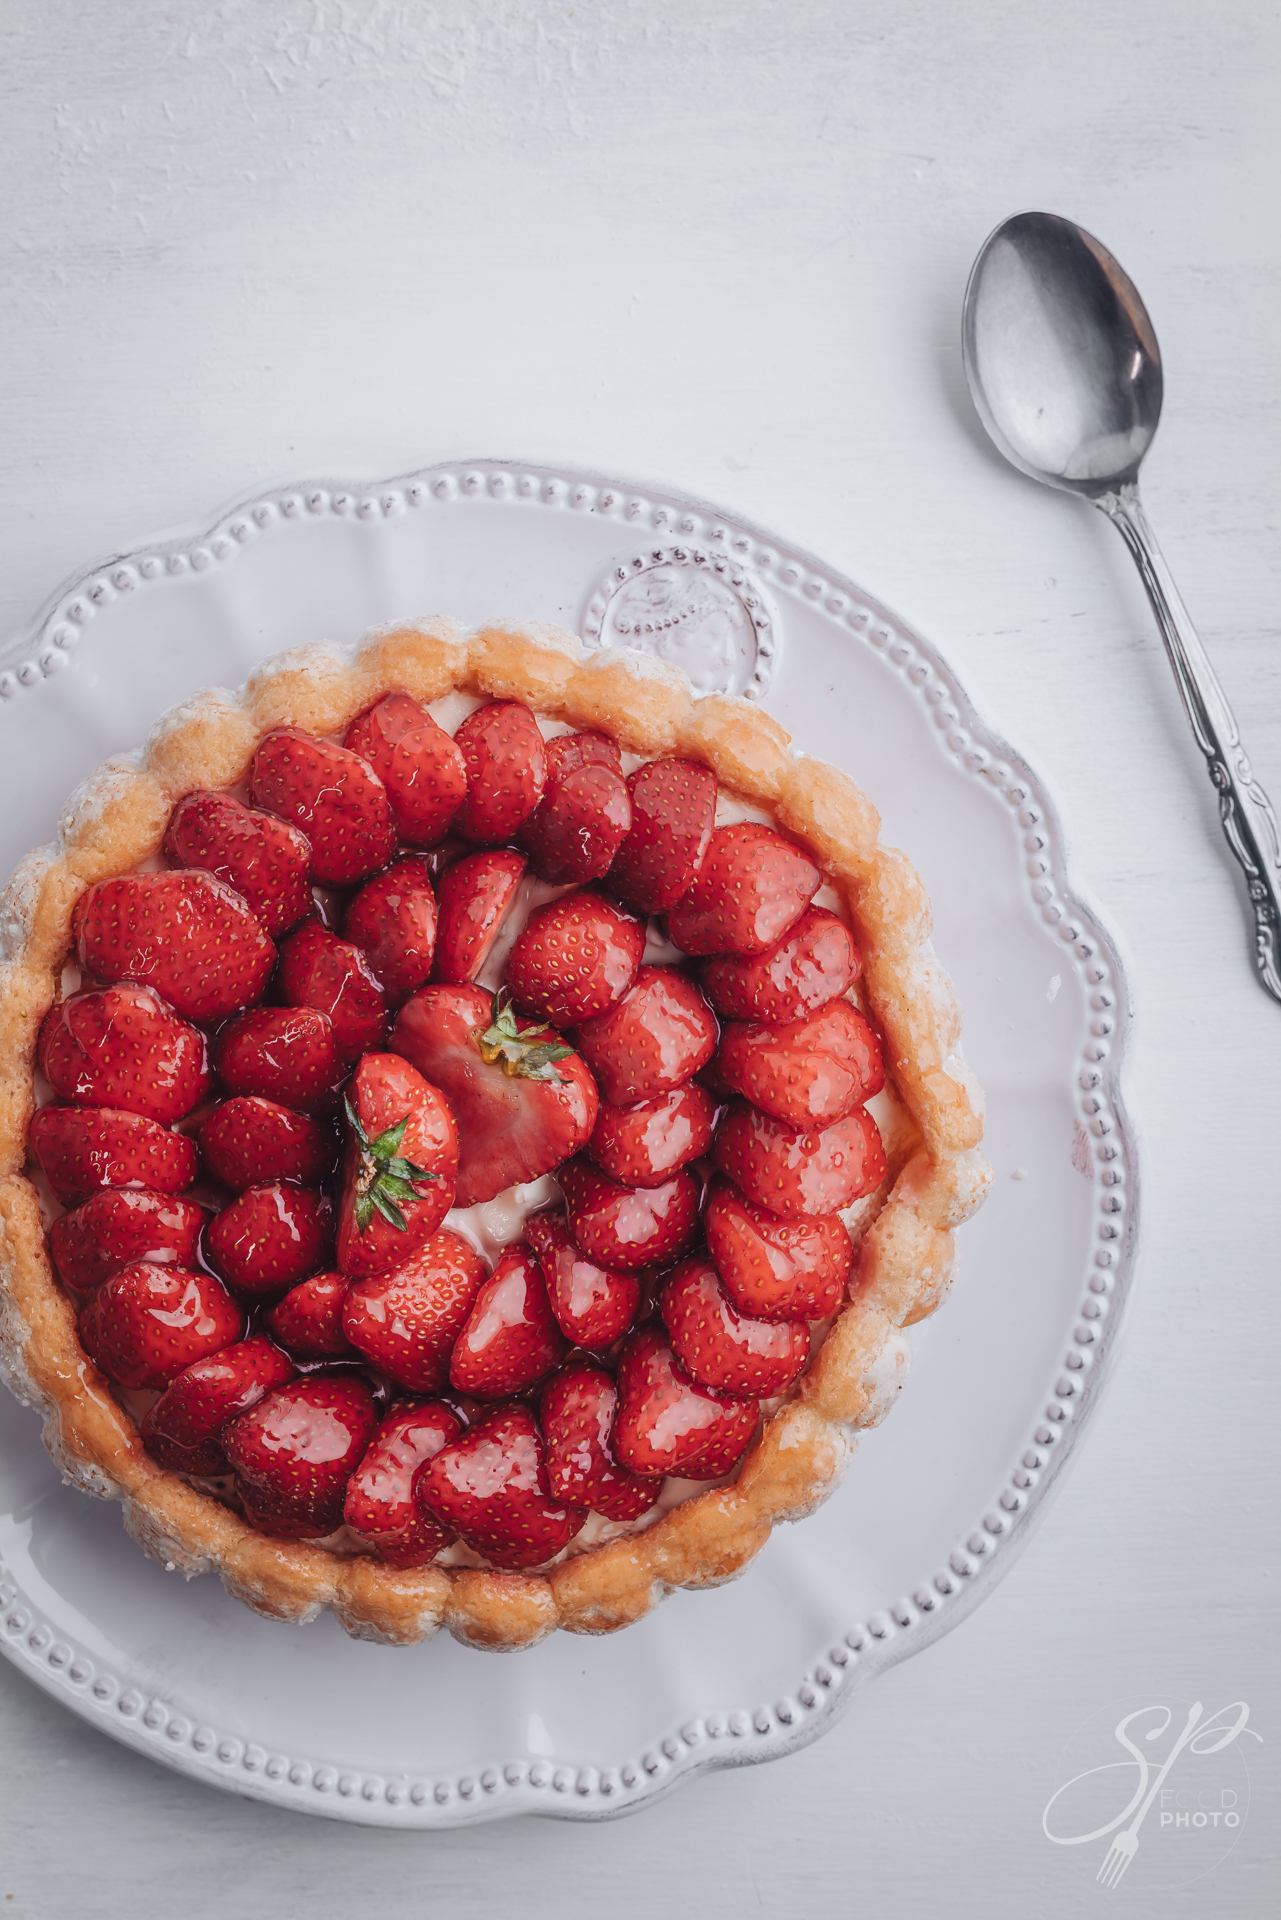 Delicious fresh Charlotte cake with strawberries